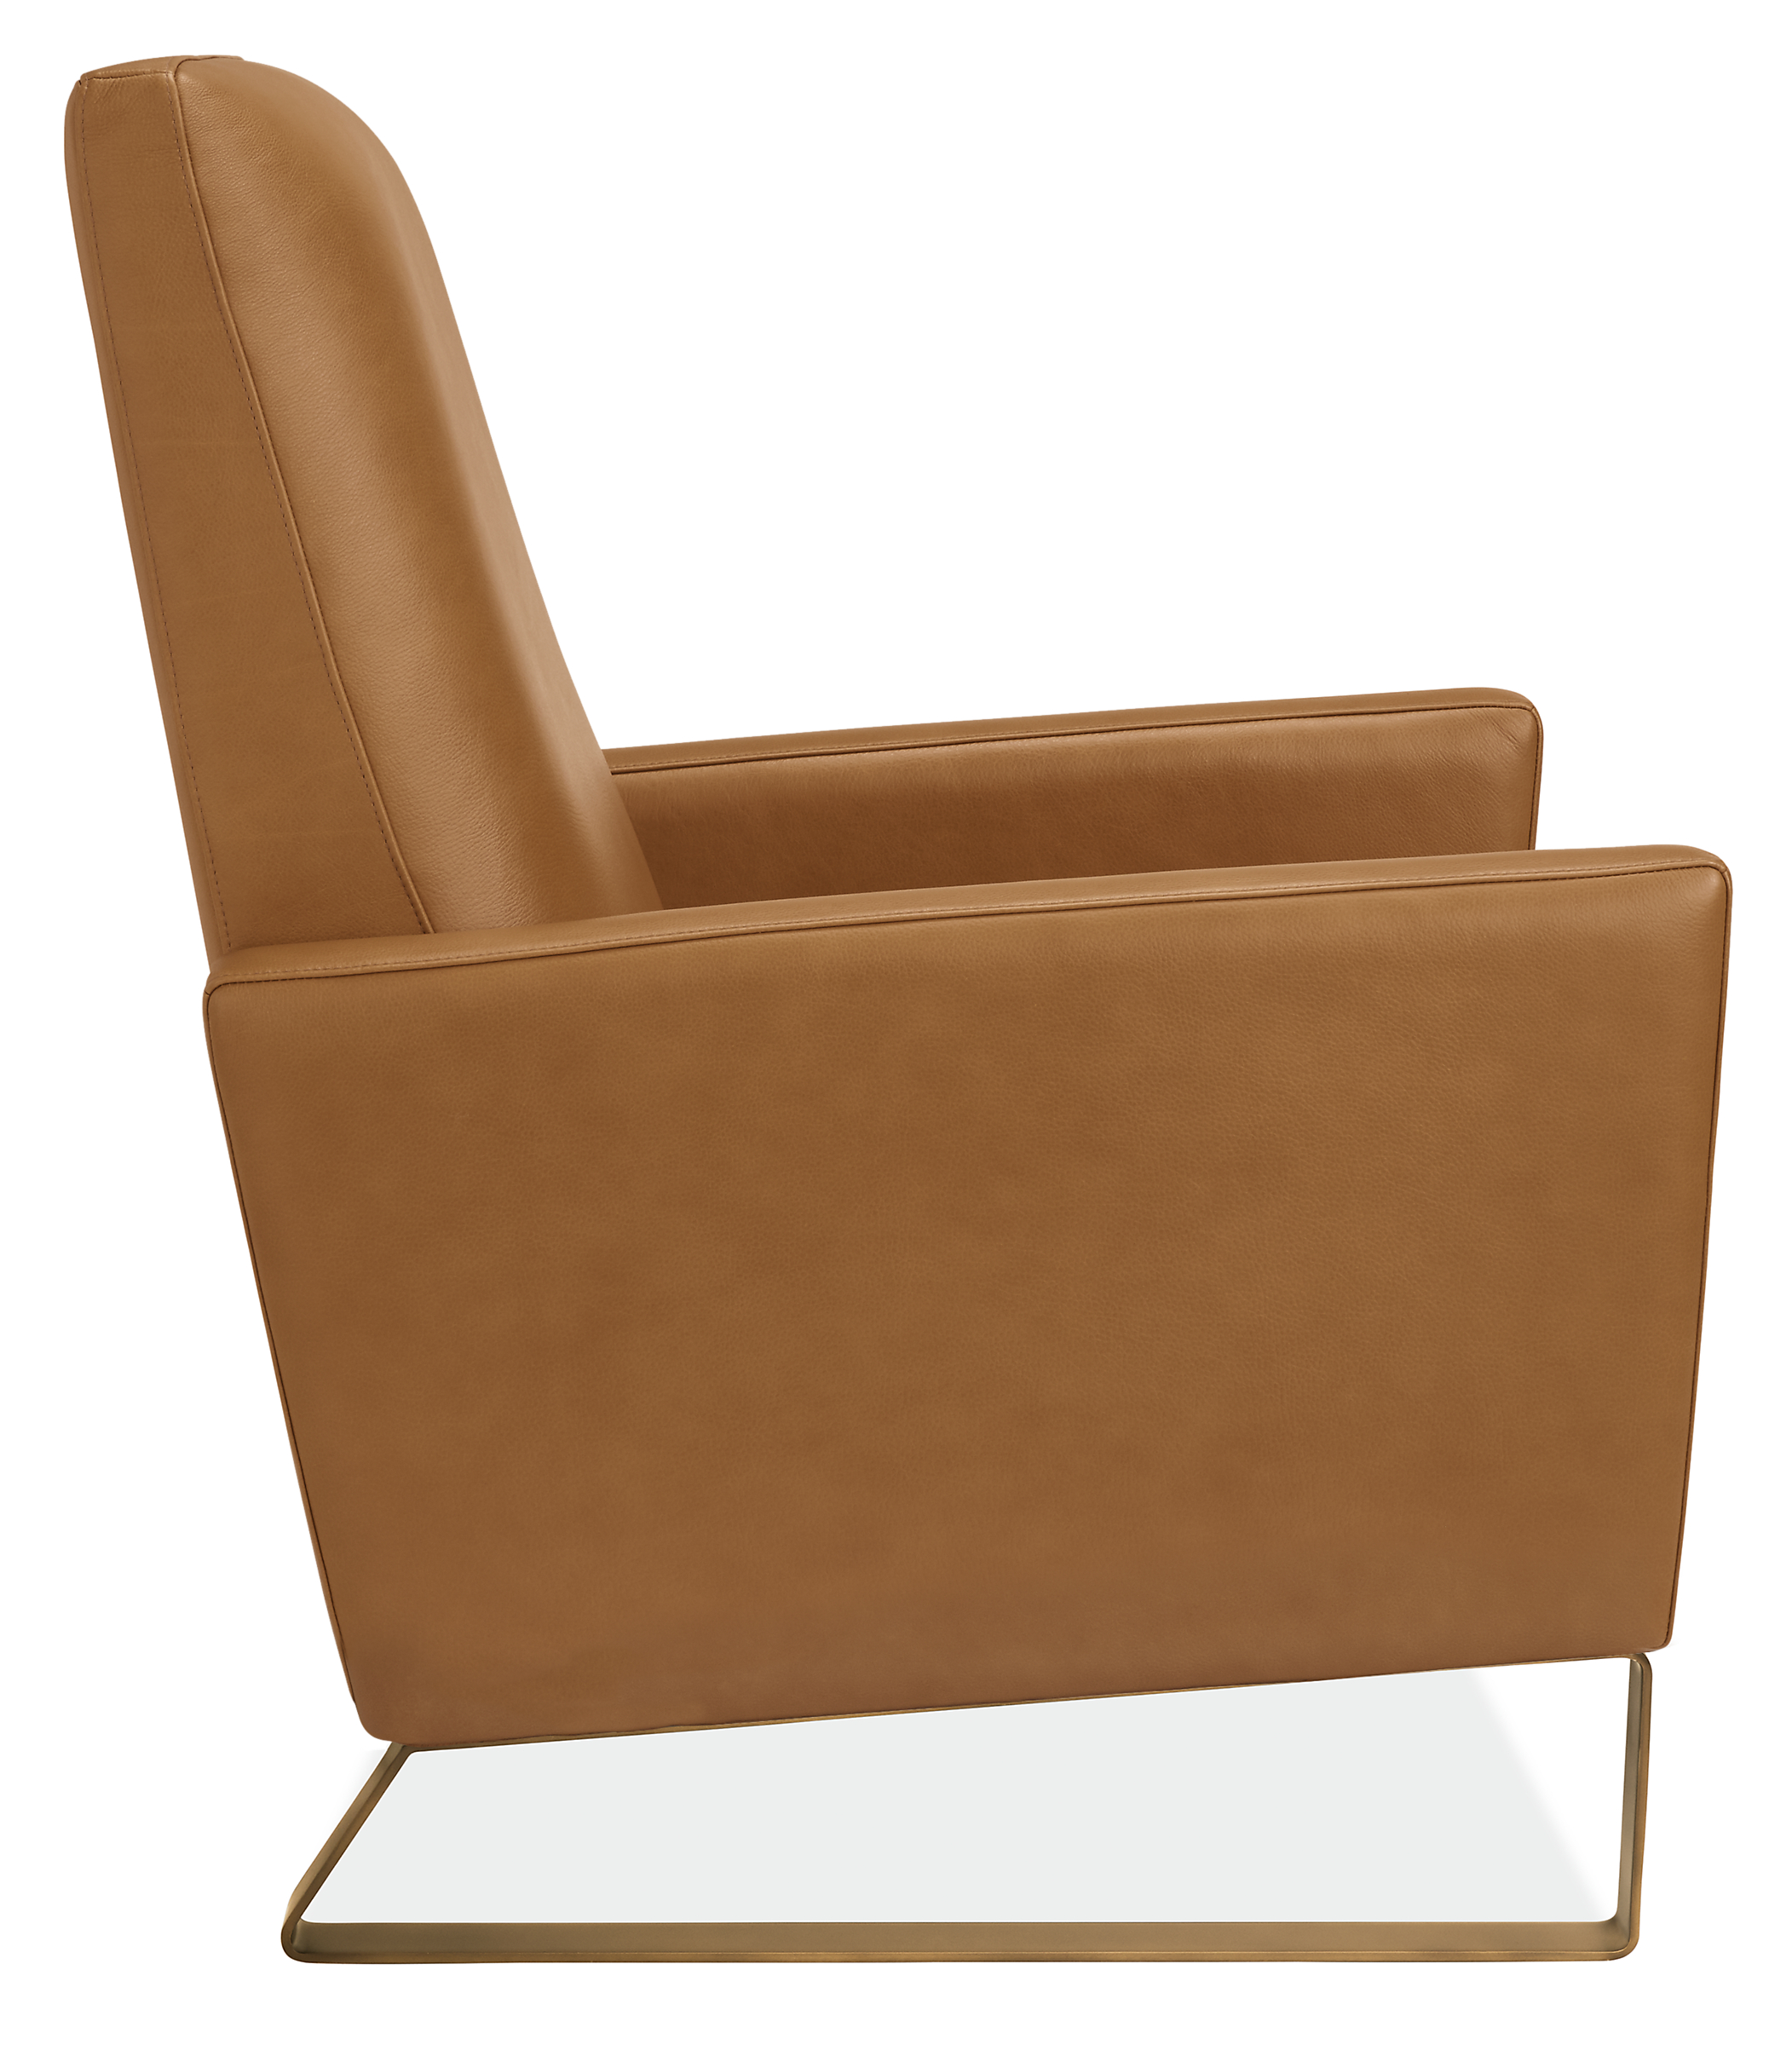 Side view of Arlo Thin-Arm Recliner in Vento Leather with Metal Base.